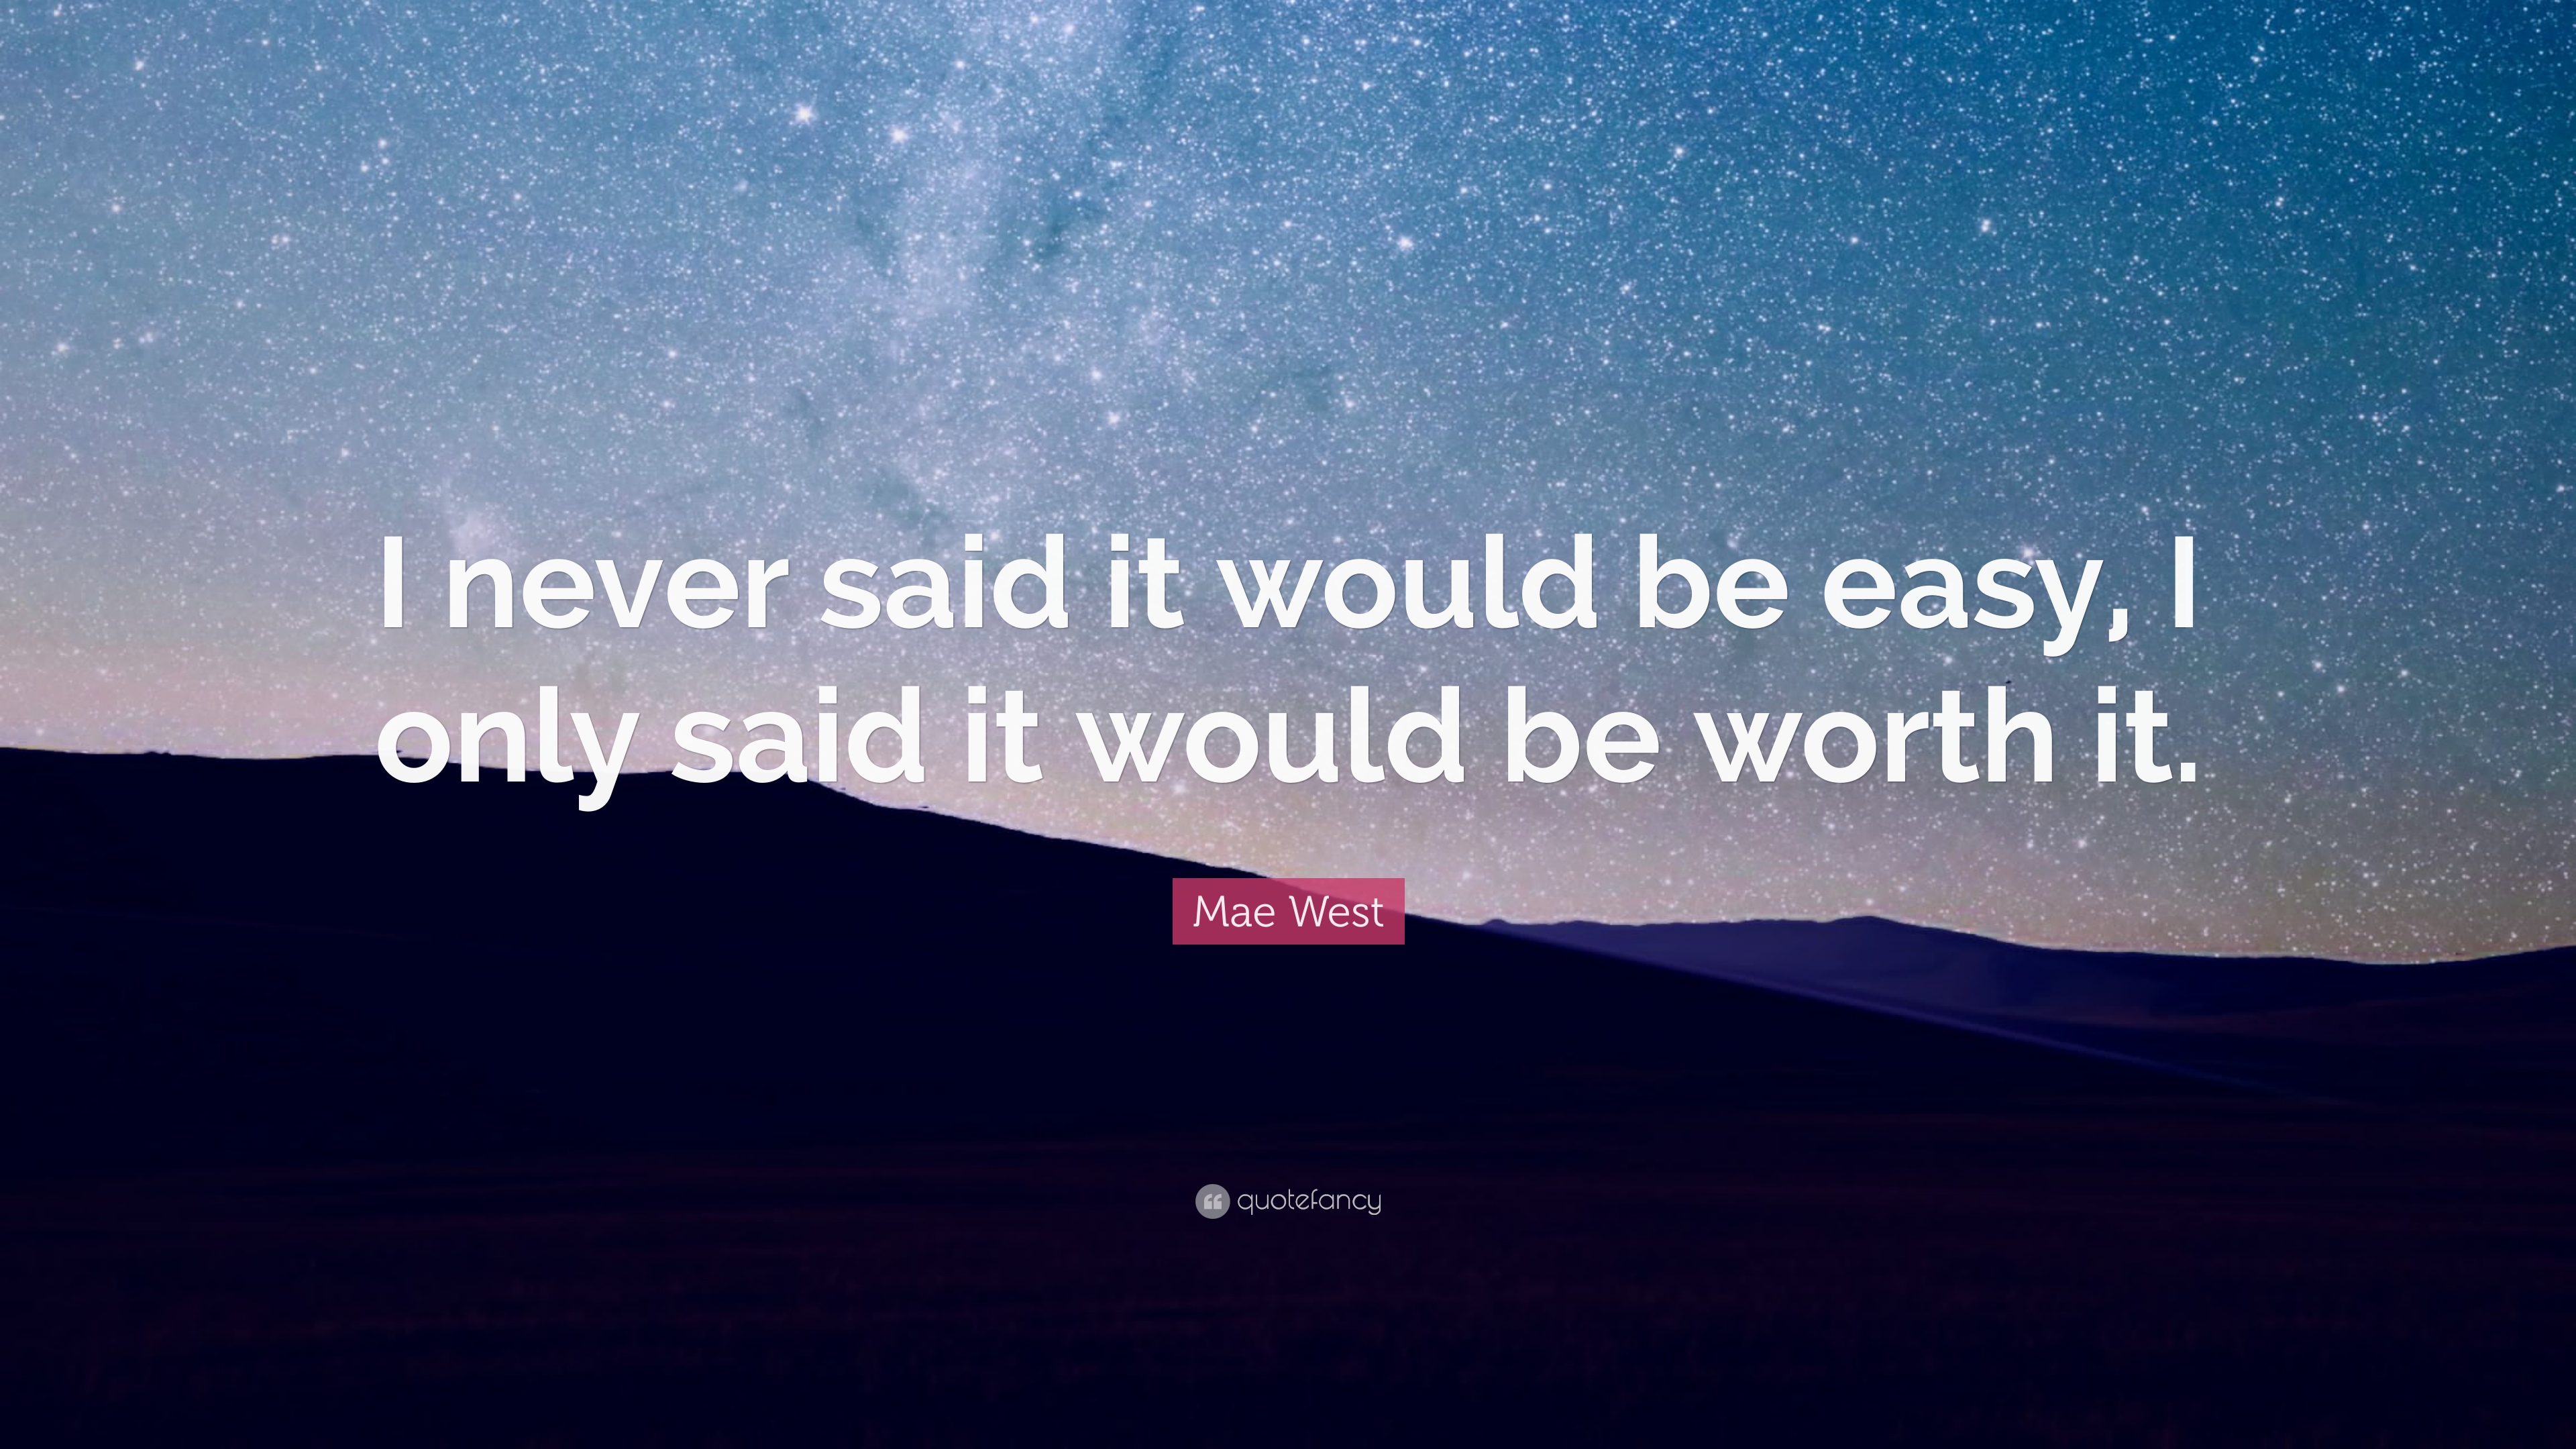 Mae West Quote: “I never said it would be easy, I only said it